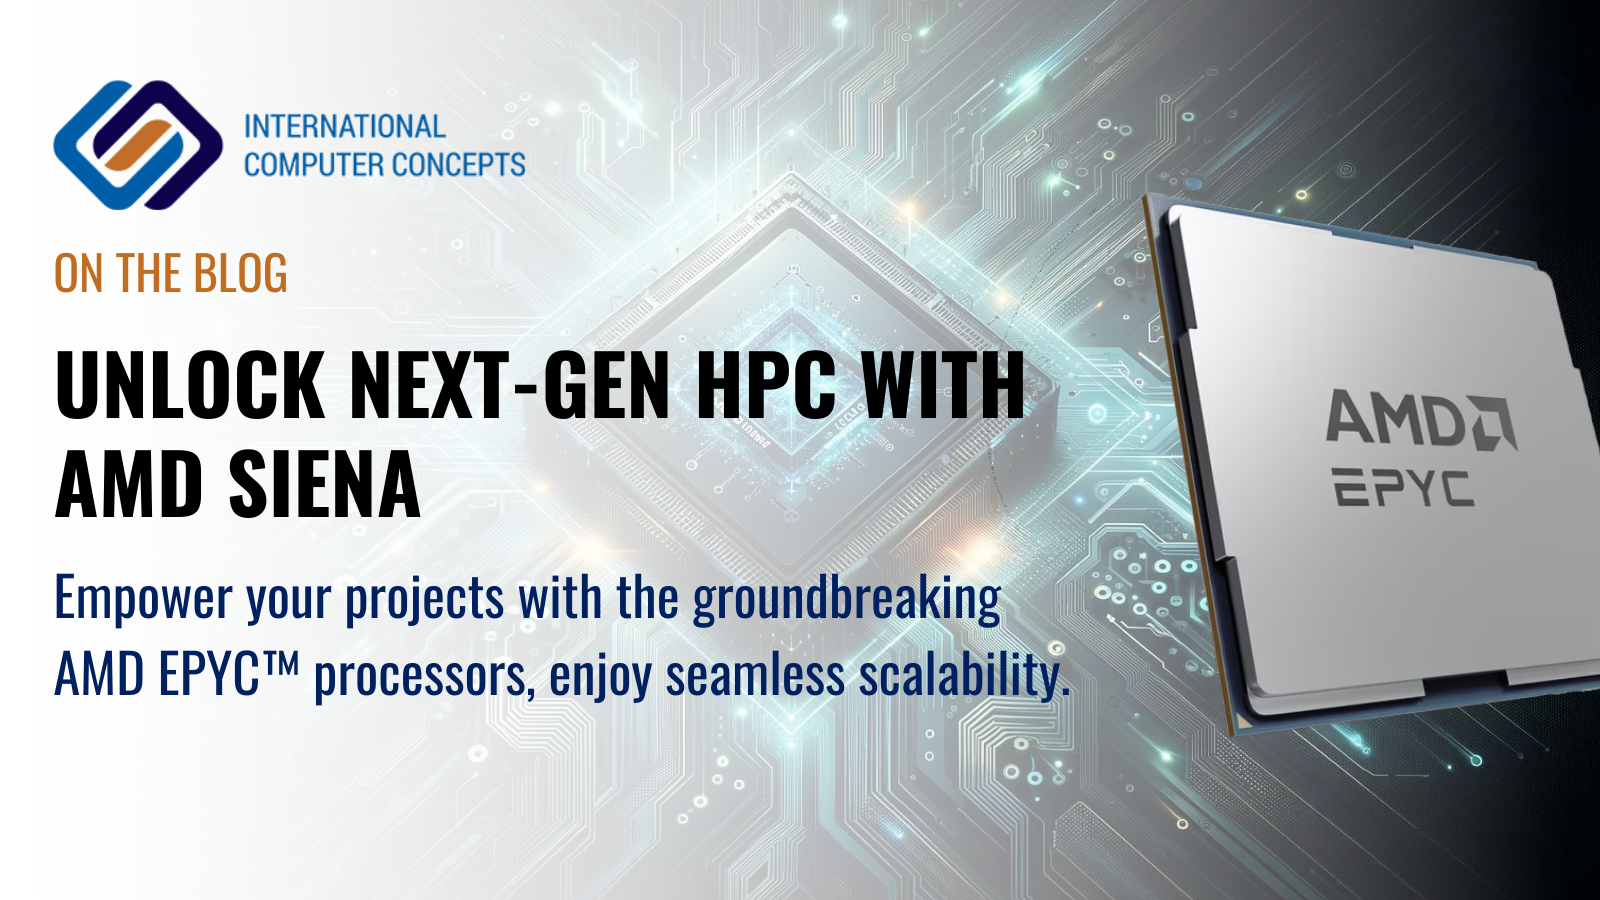 Why AMD Siena for HPC?